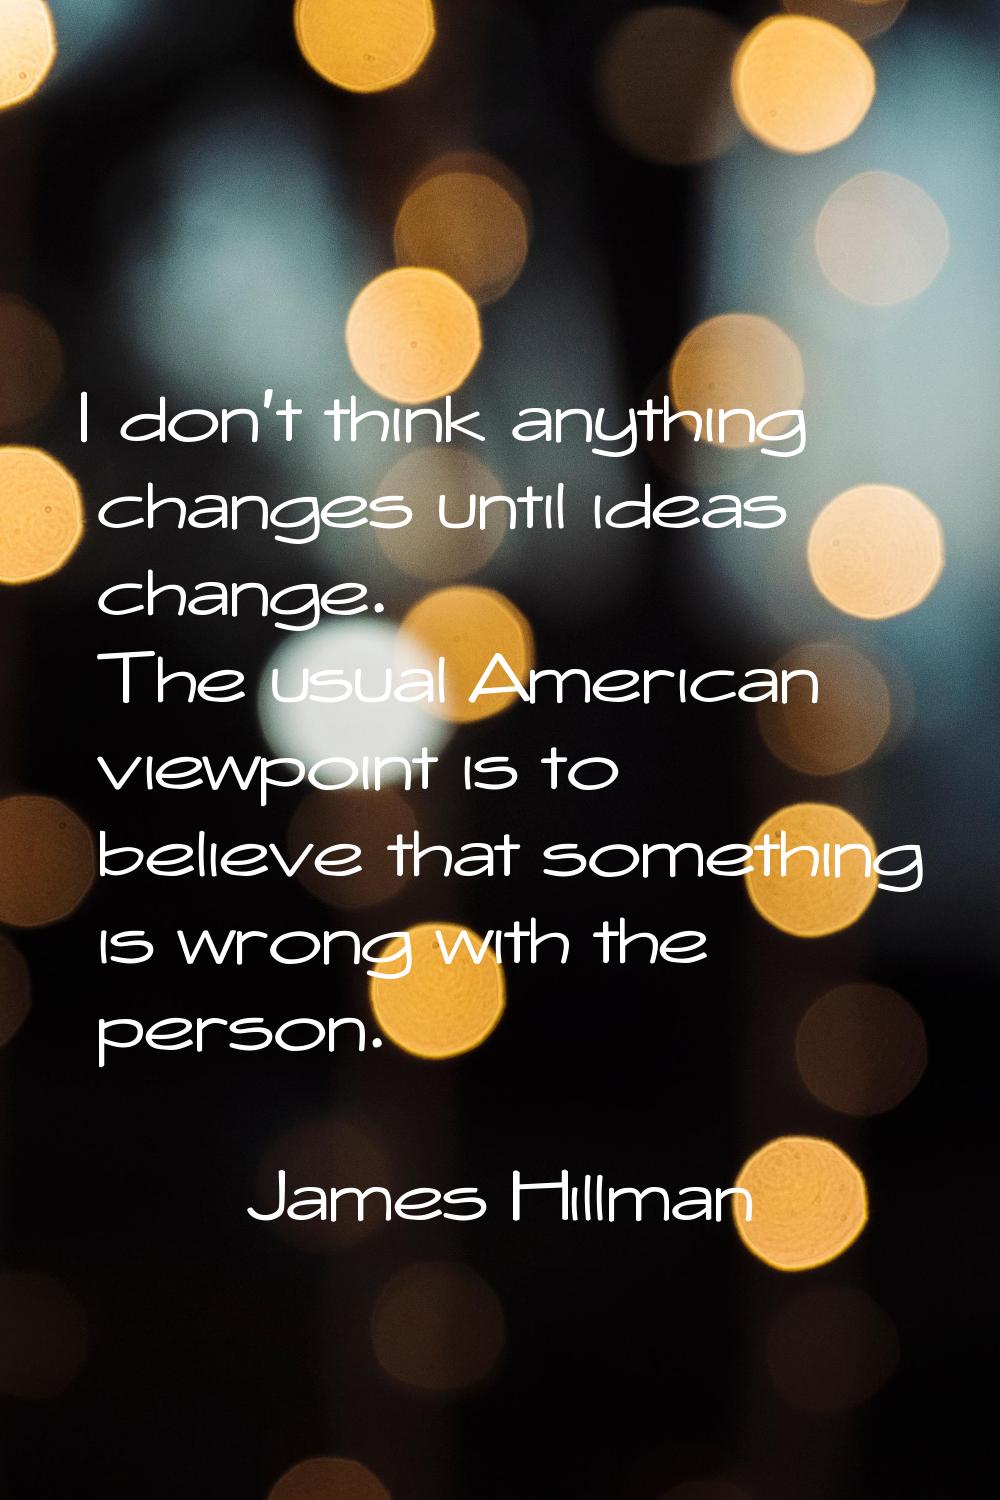 I don't think anything changes until ideas change. The usual American viewpoint is to believe that 